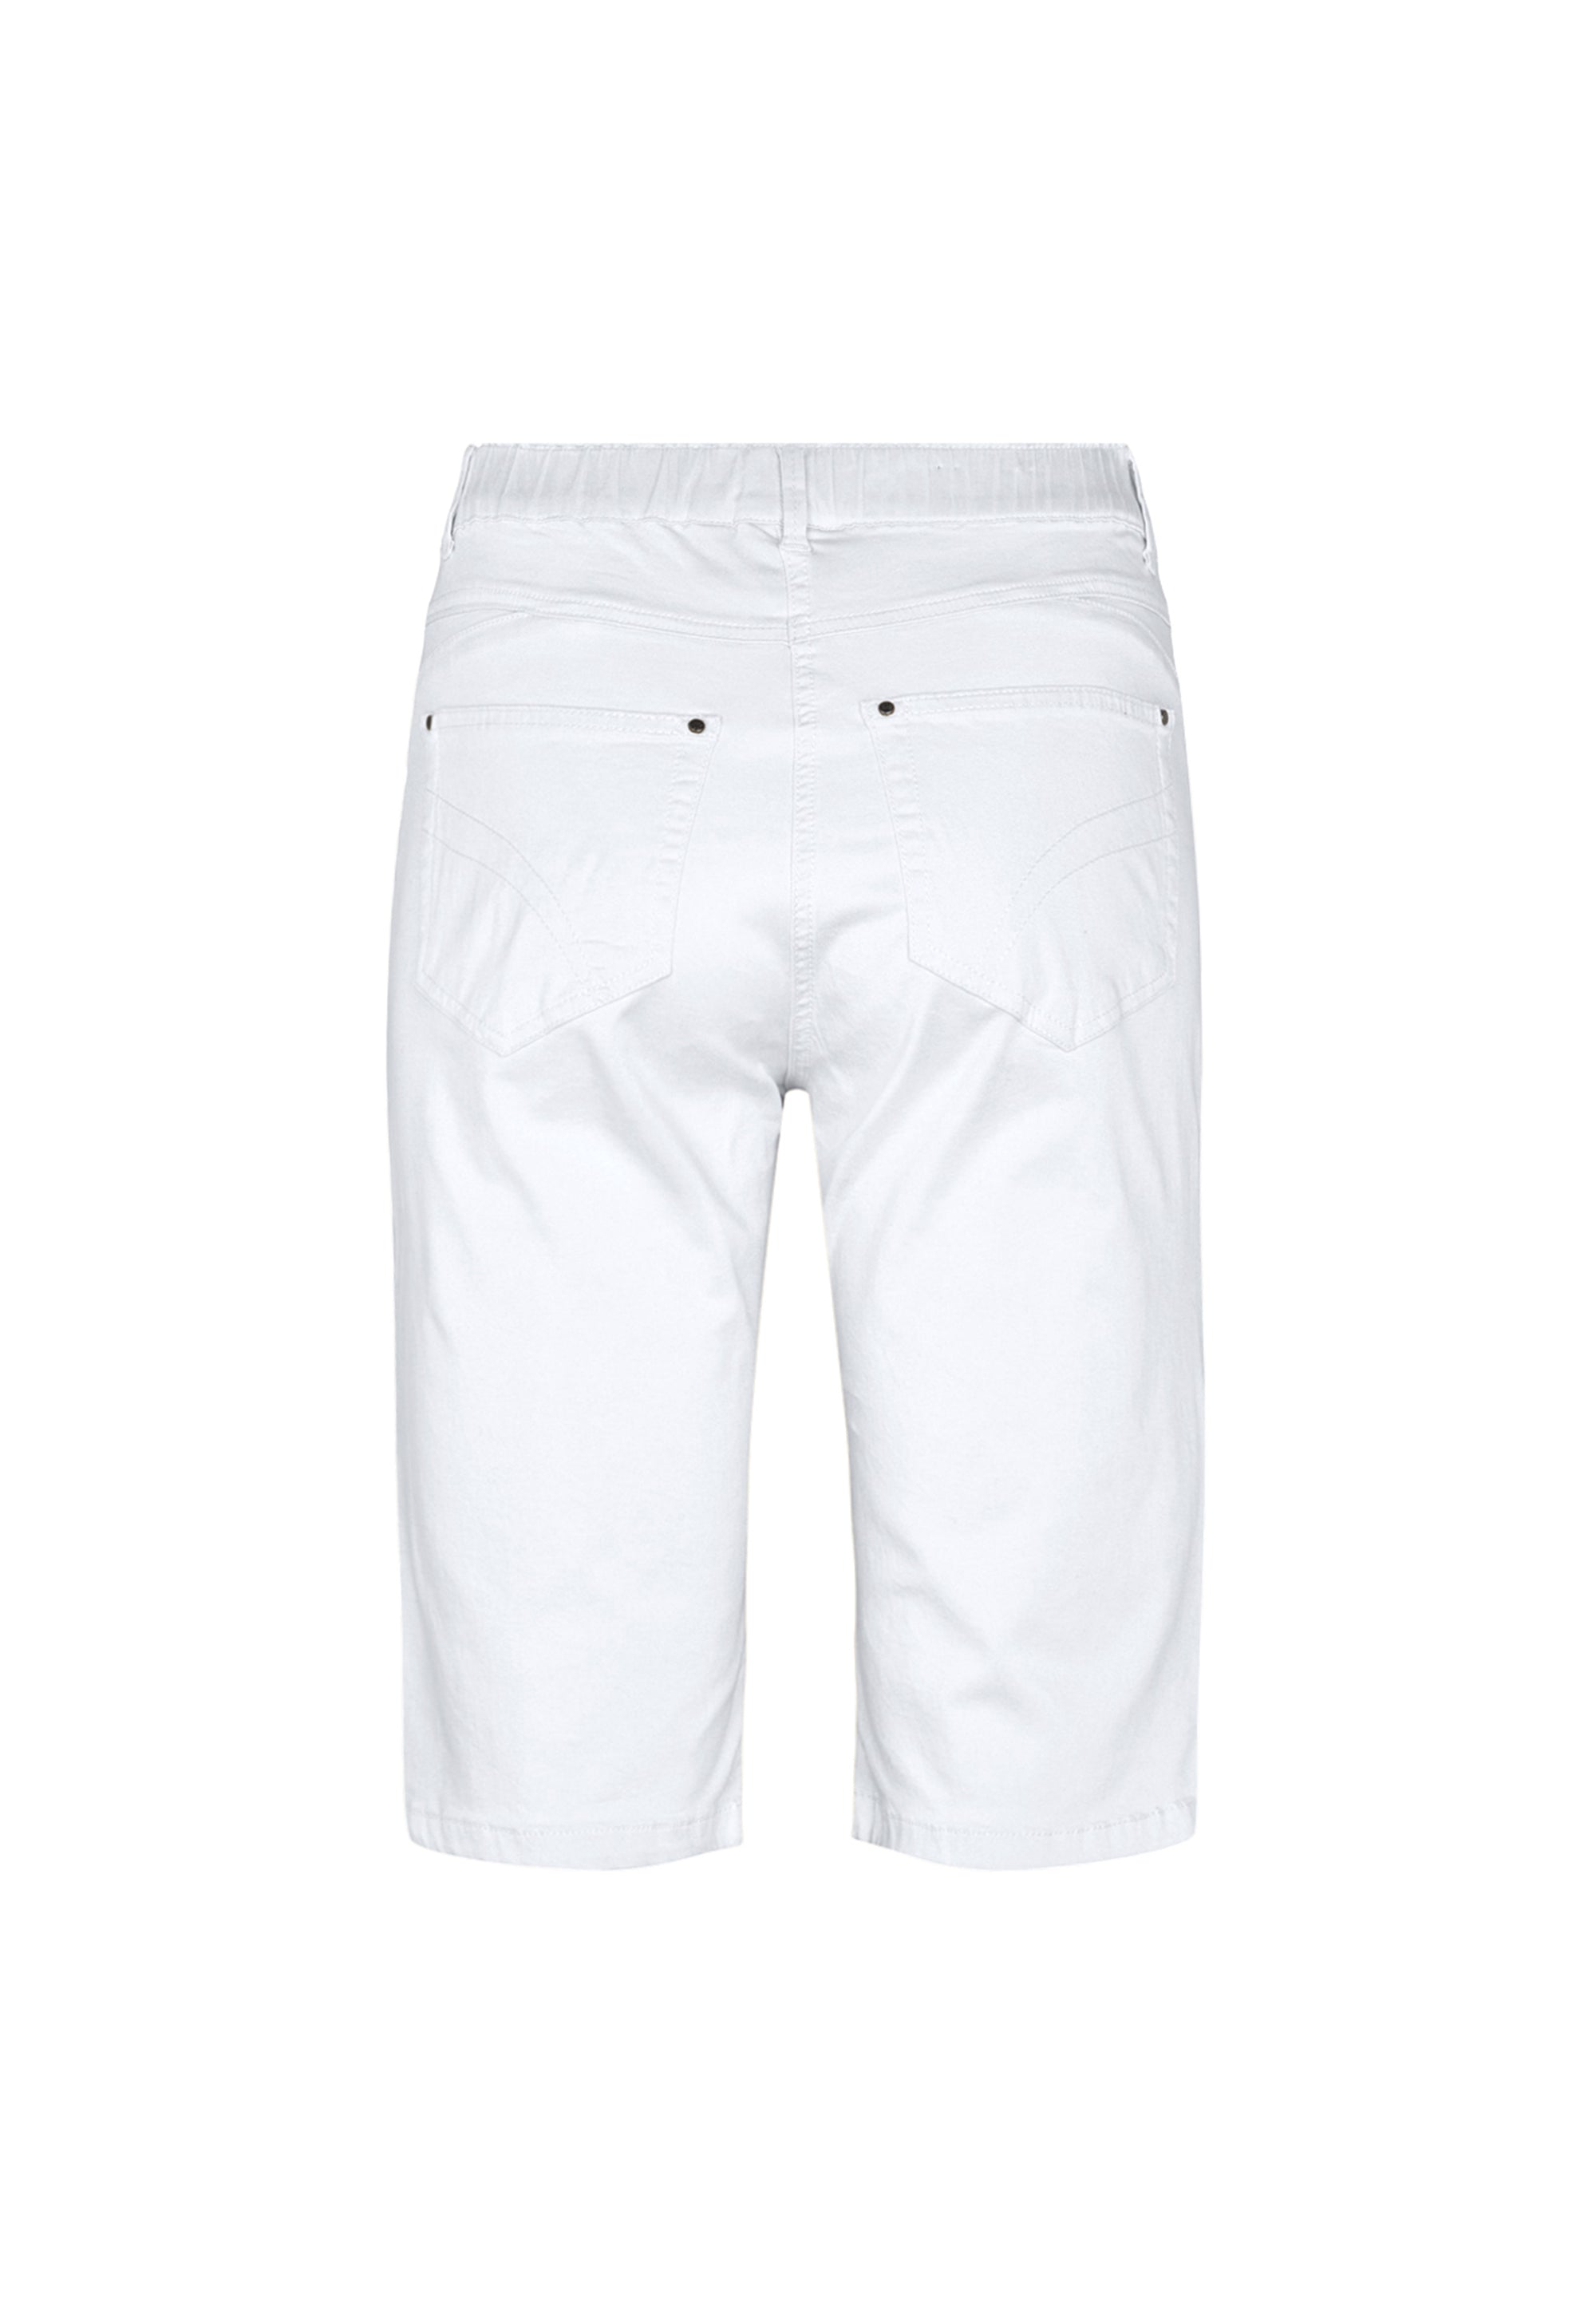 LAURIE Helen Straight Shorts Trousers STRAIGHT 10122 White